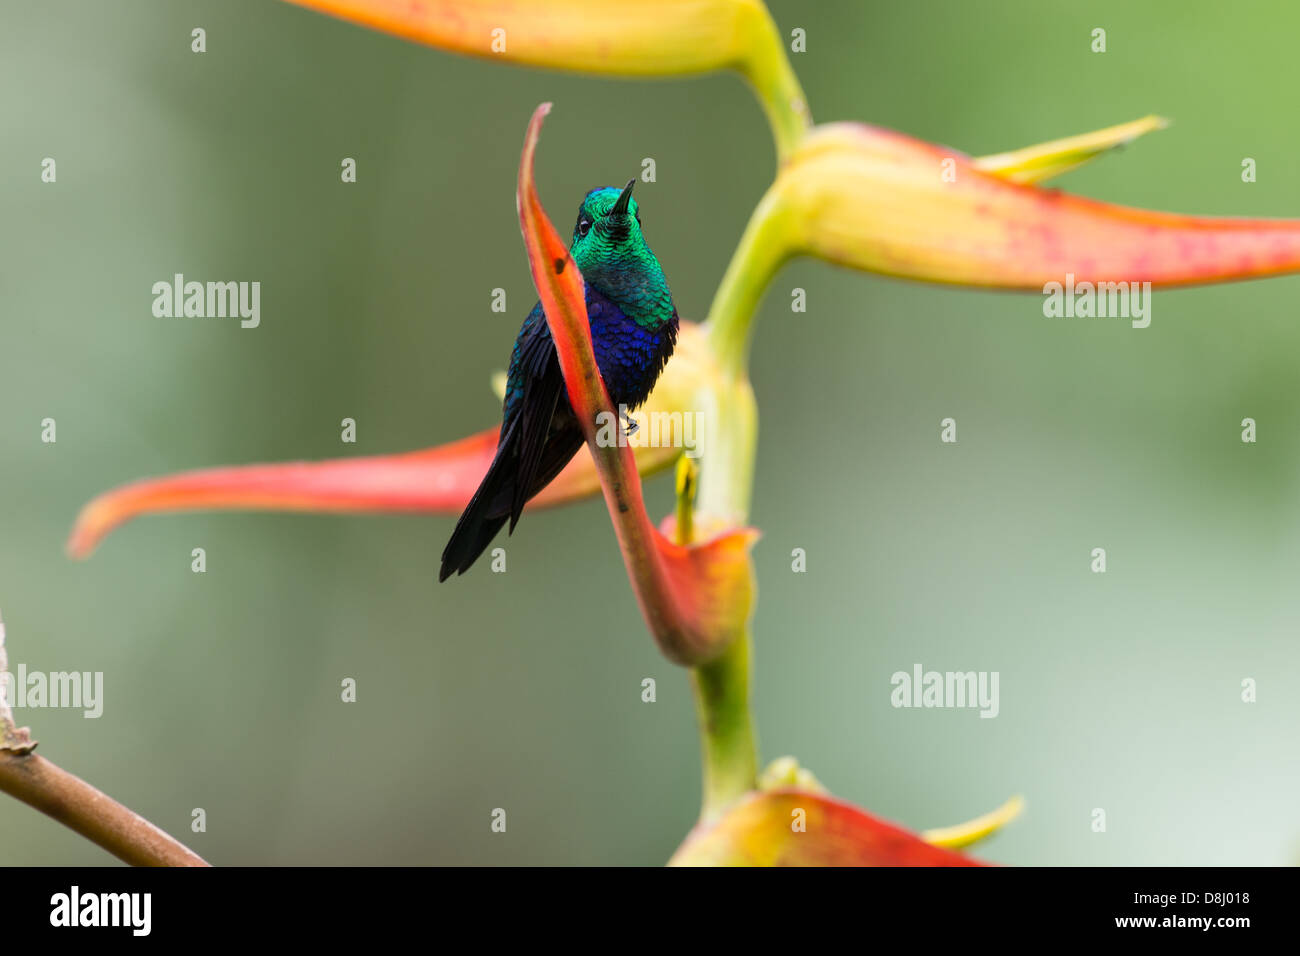 Stock photo of a velvet-purple coronet sitting on a bird of paradise flower in the cloud forest, Ecuador. Stock Photo